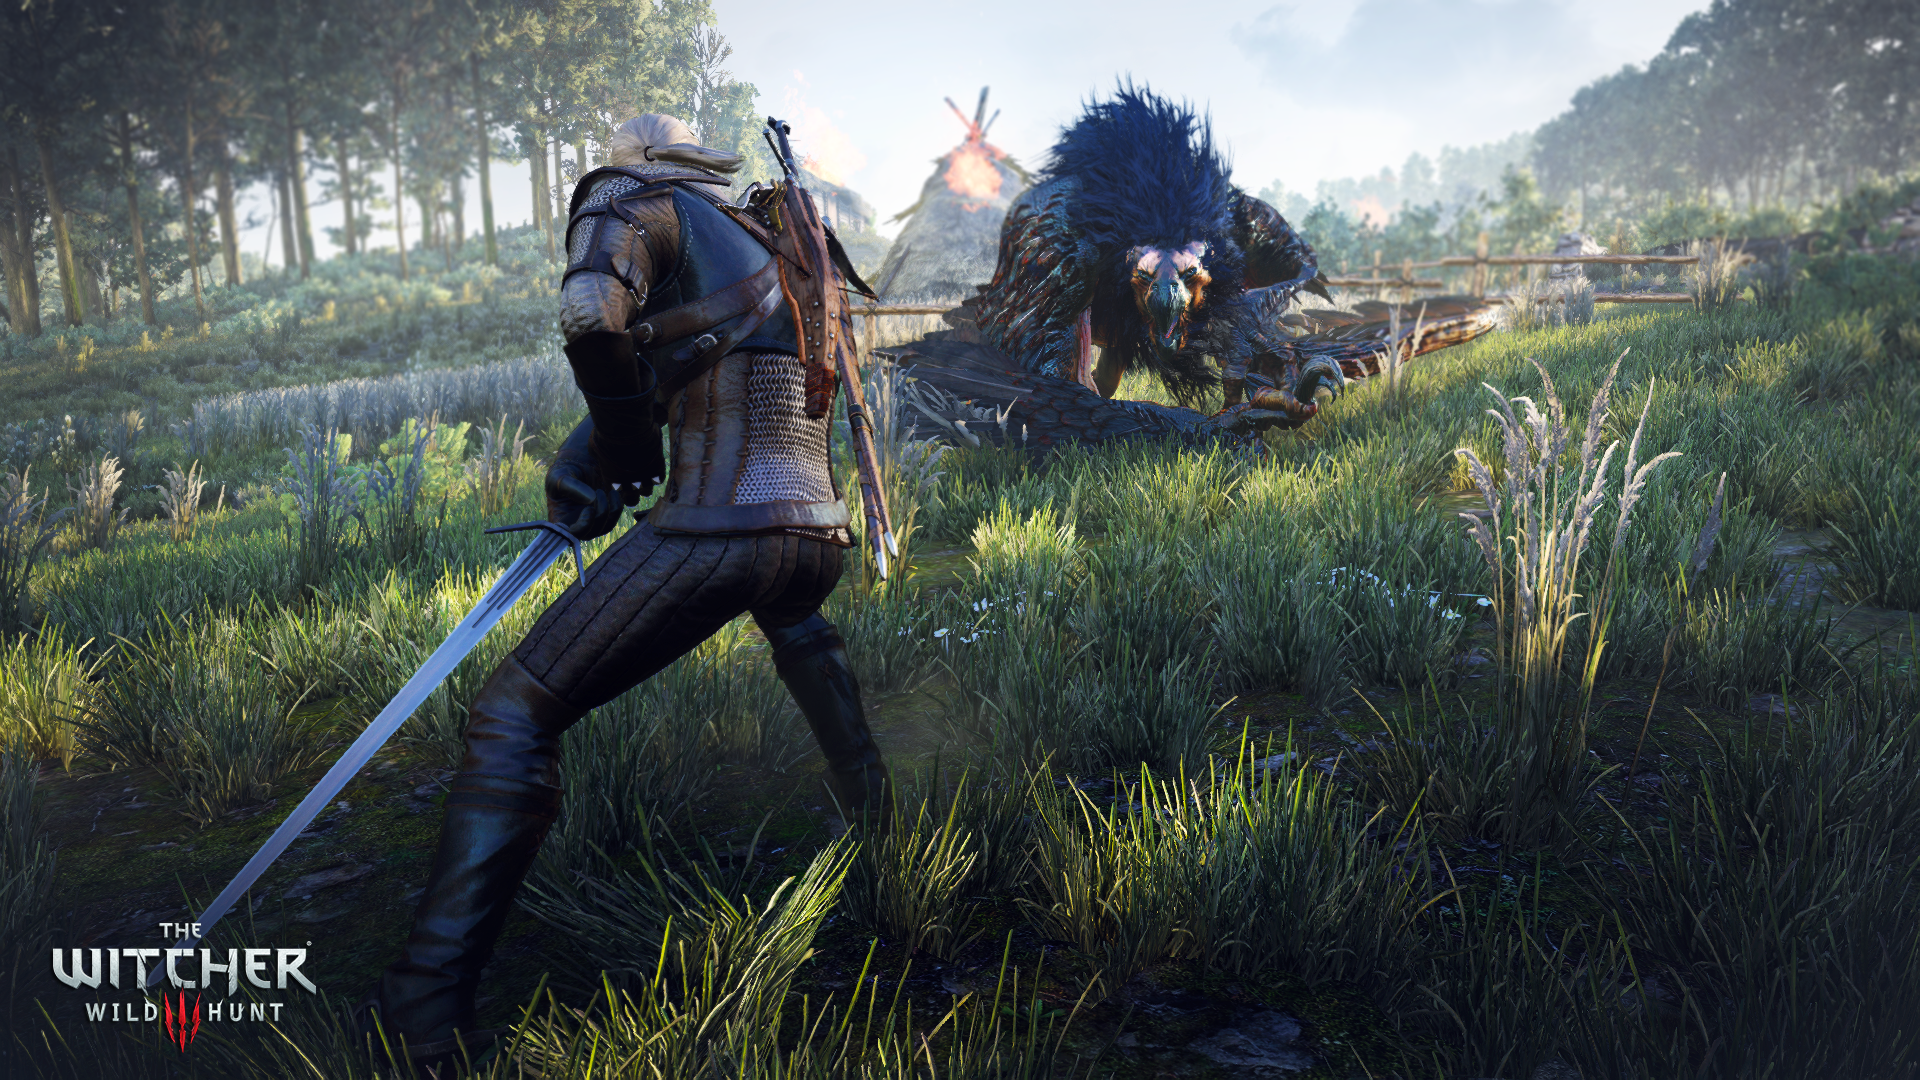 The Witcher 3 Patch 1.12 Confirmed For December Release, No News ...